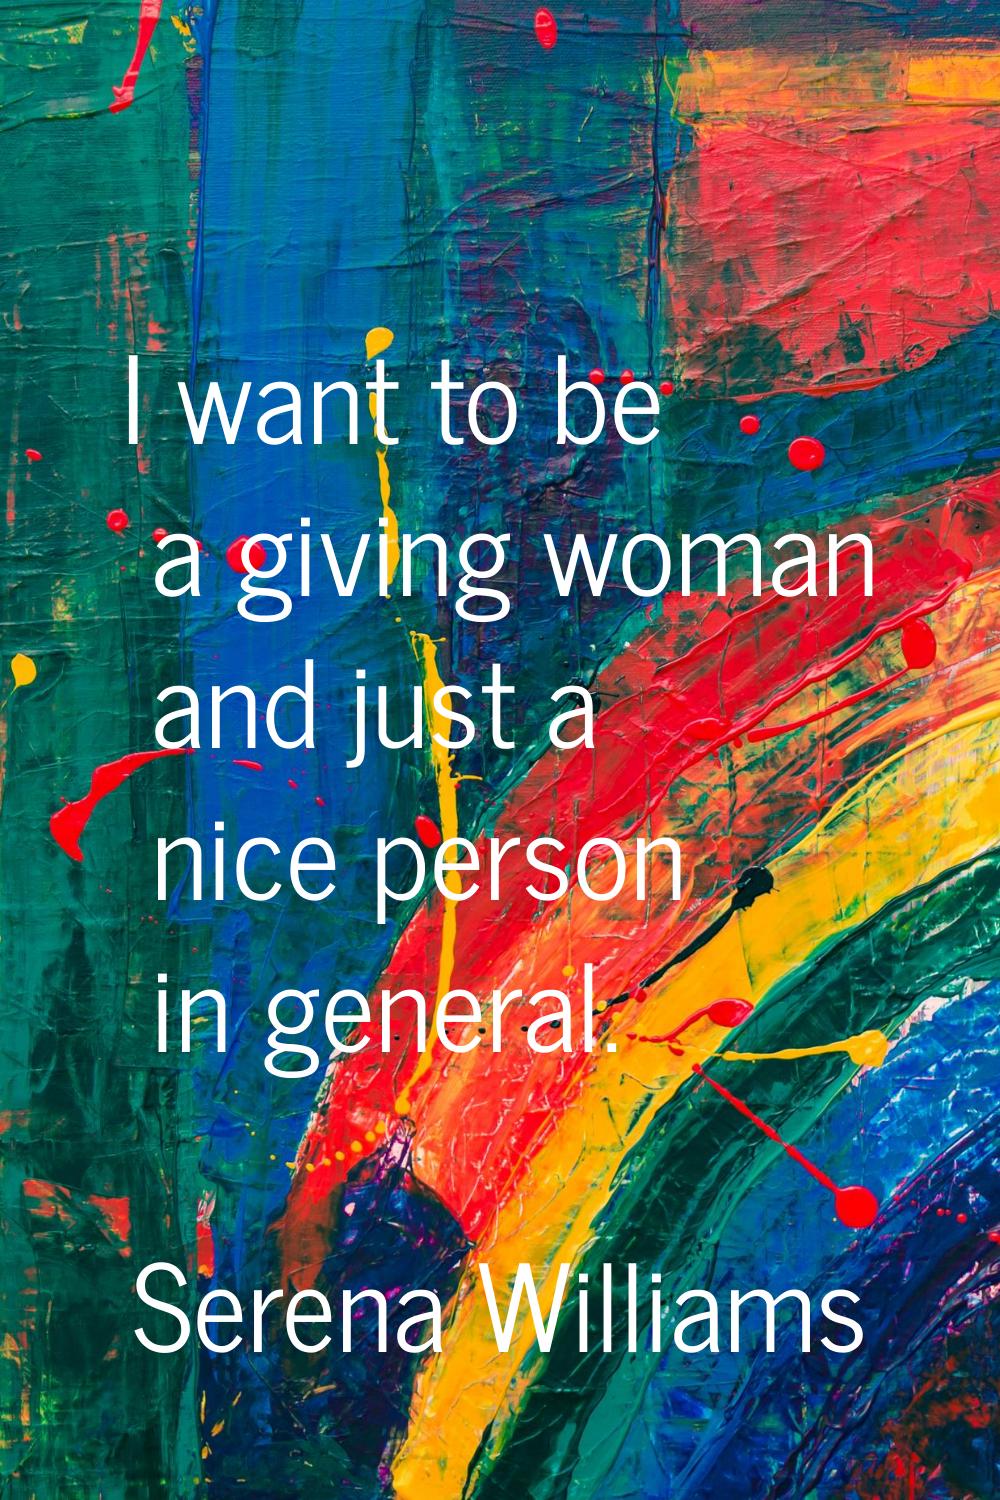 I want to be a giving woman and just a nice person in general.